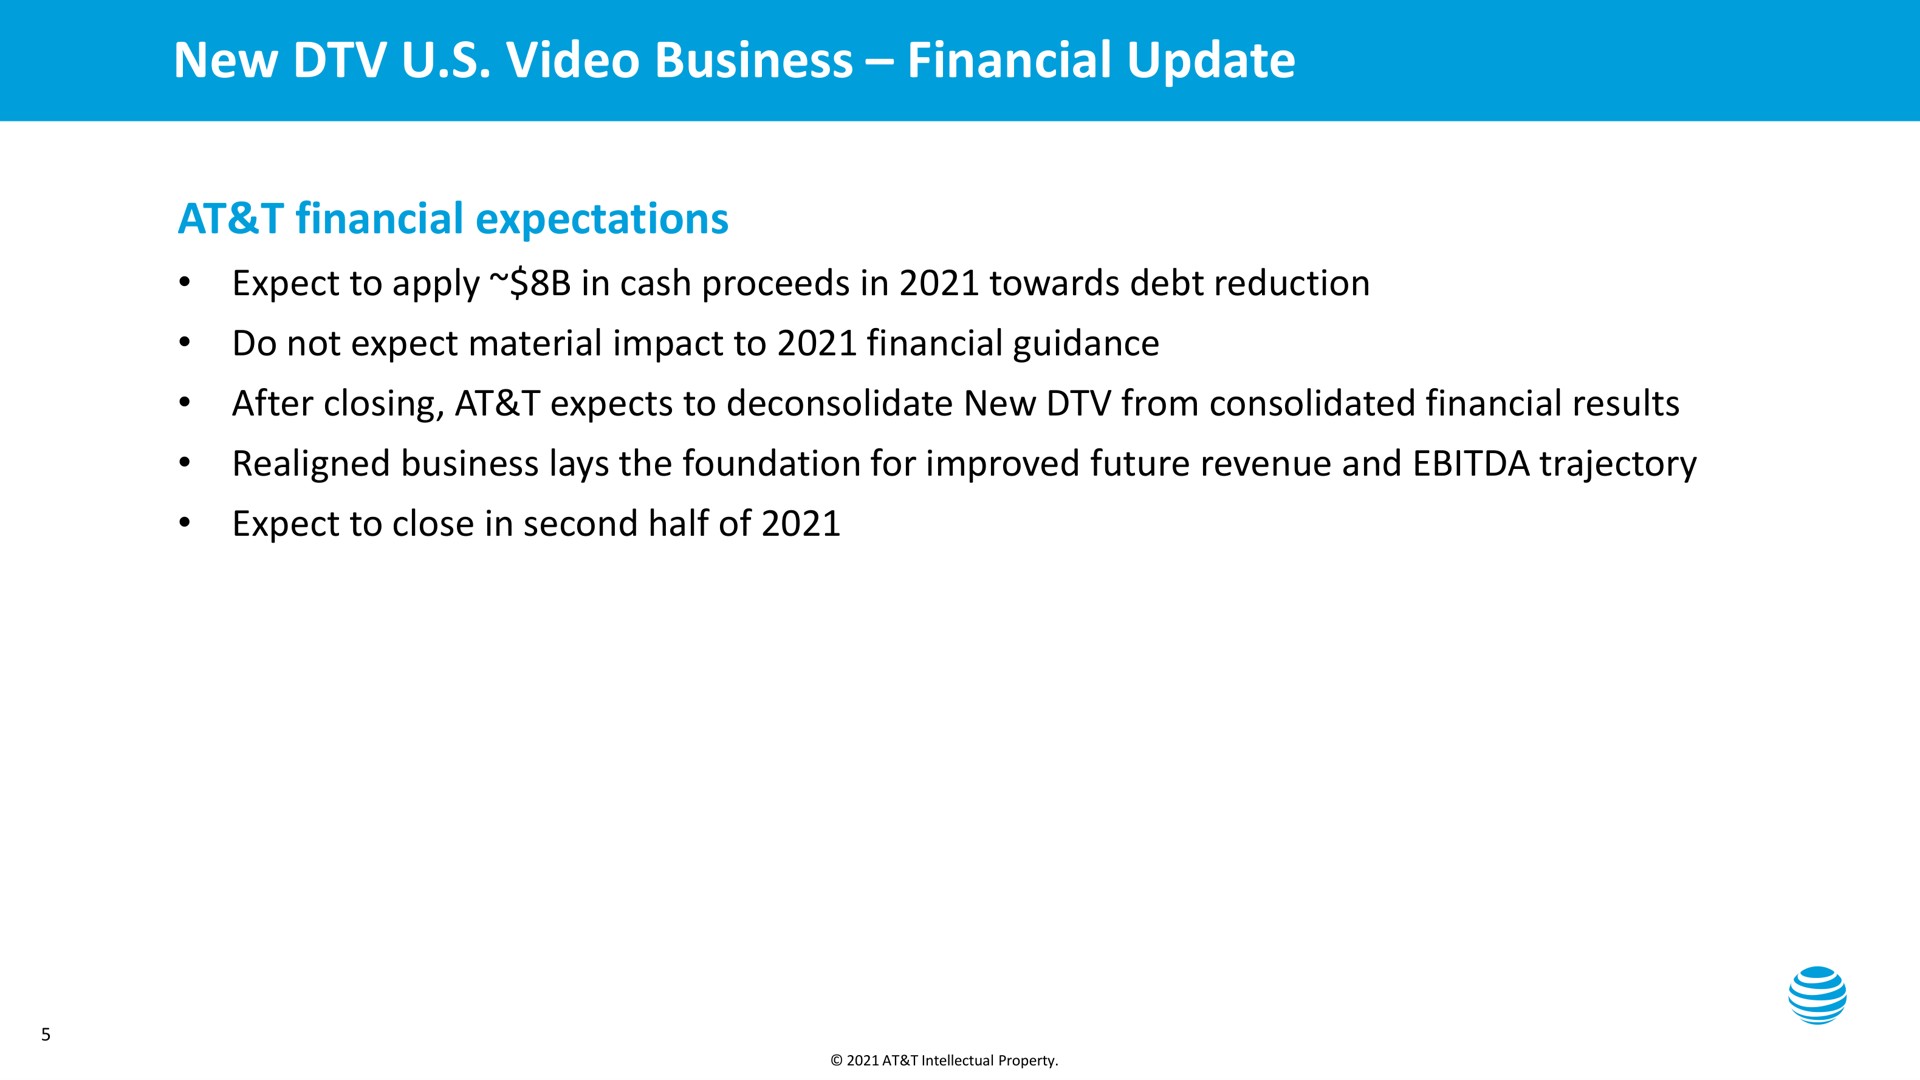 new video business financial update | AT&T